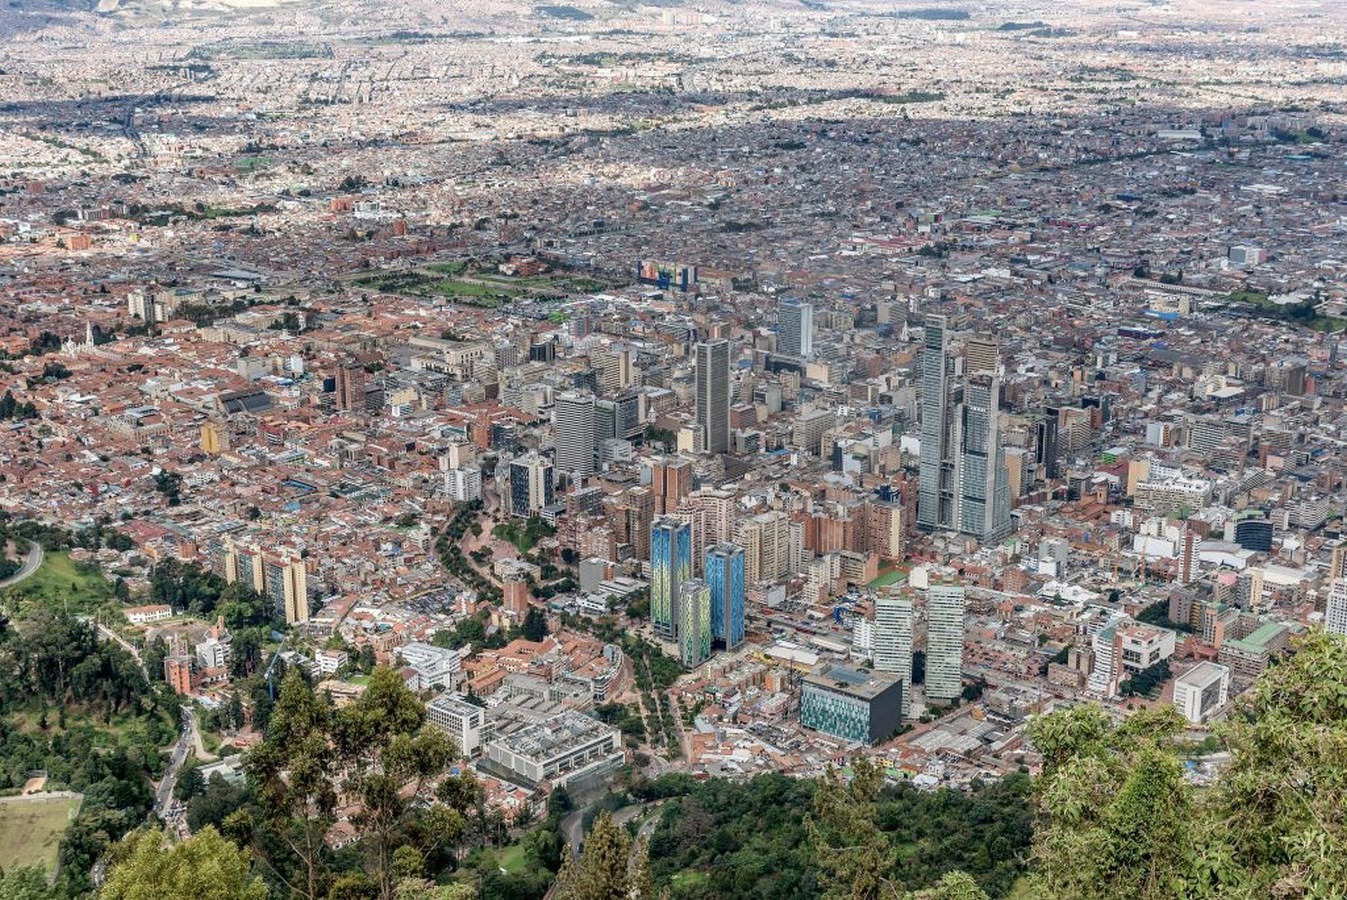 15 Places to visit in Bogotá for the Travelling Architect - Sheet1